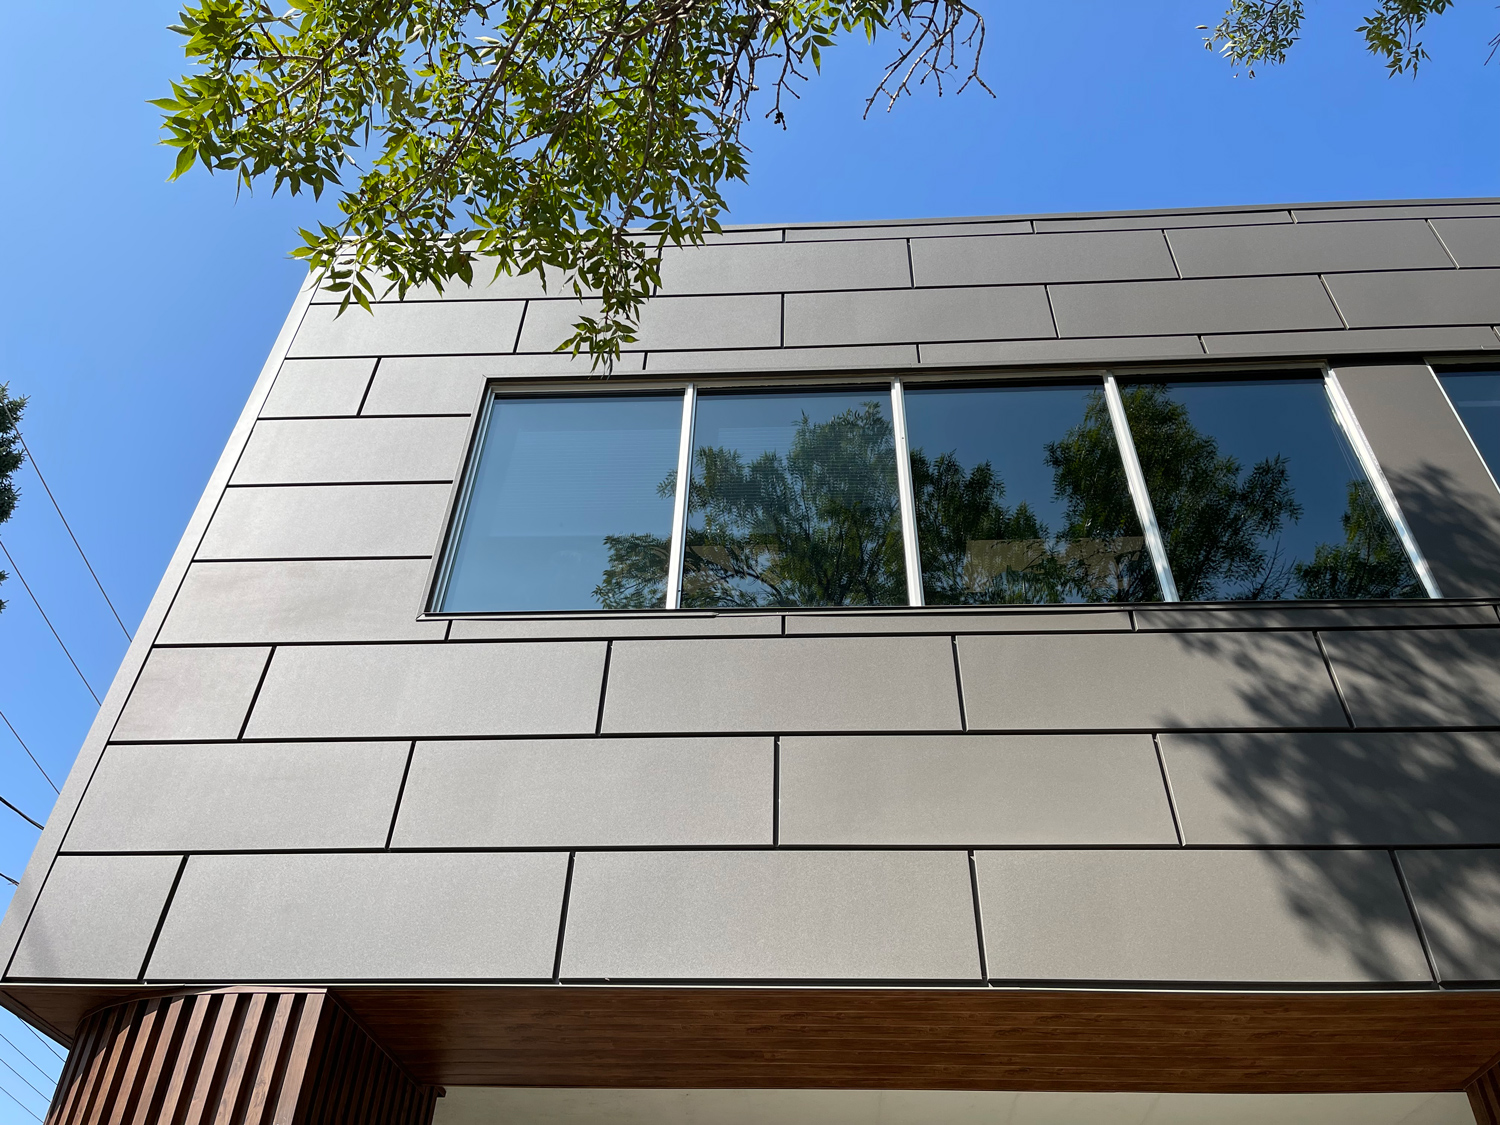 Commercial Building with Expand Modular Panels in Textured Graphite